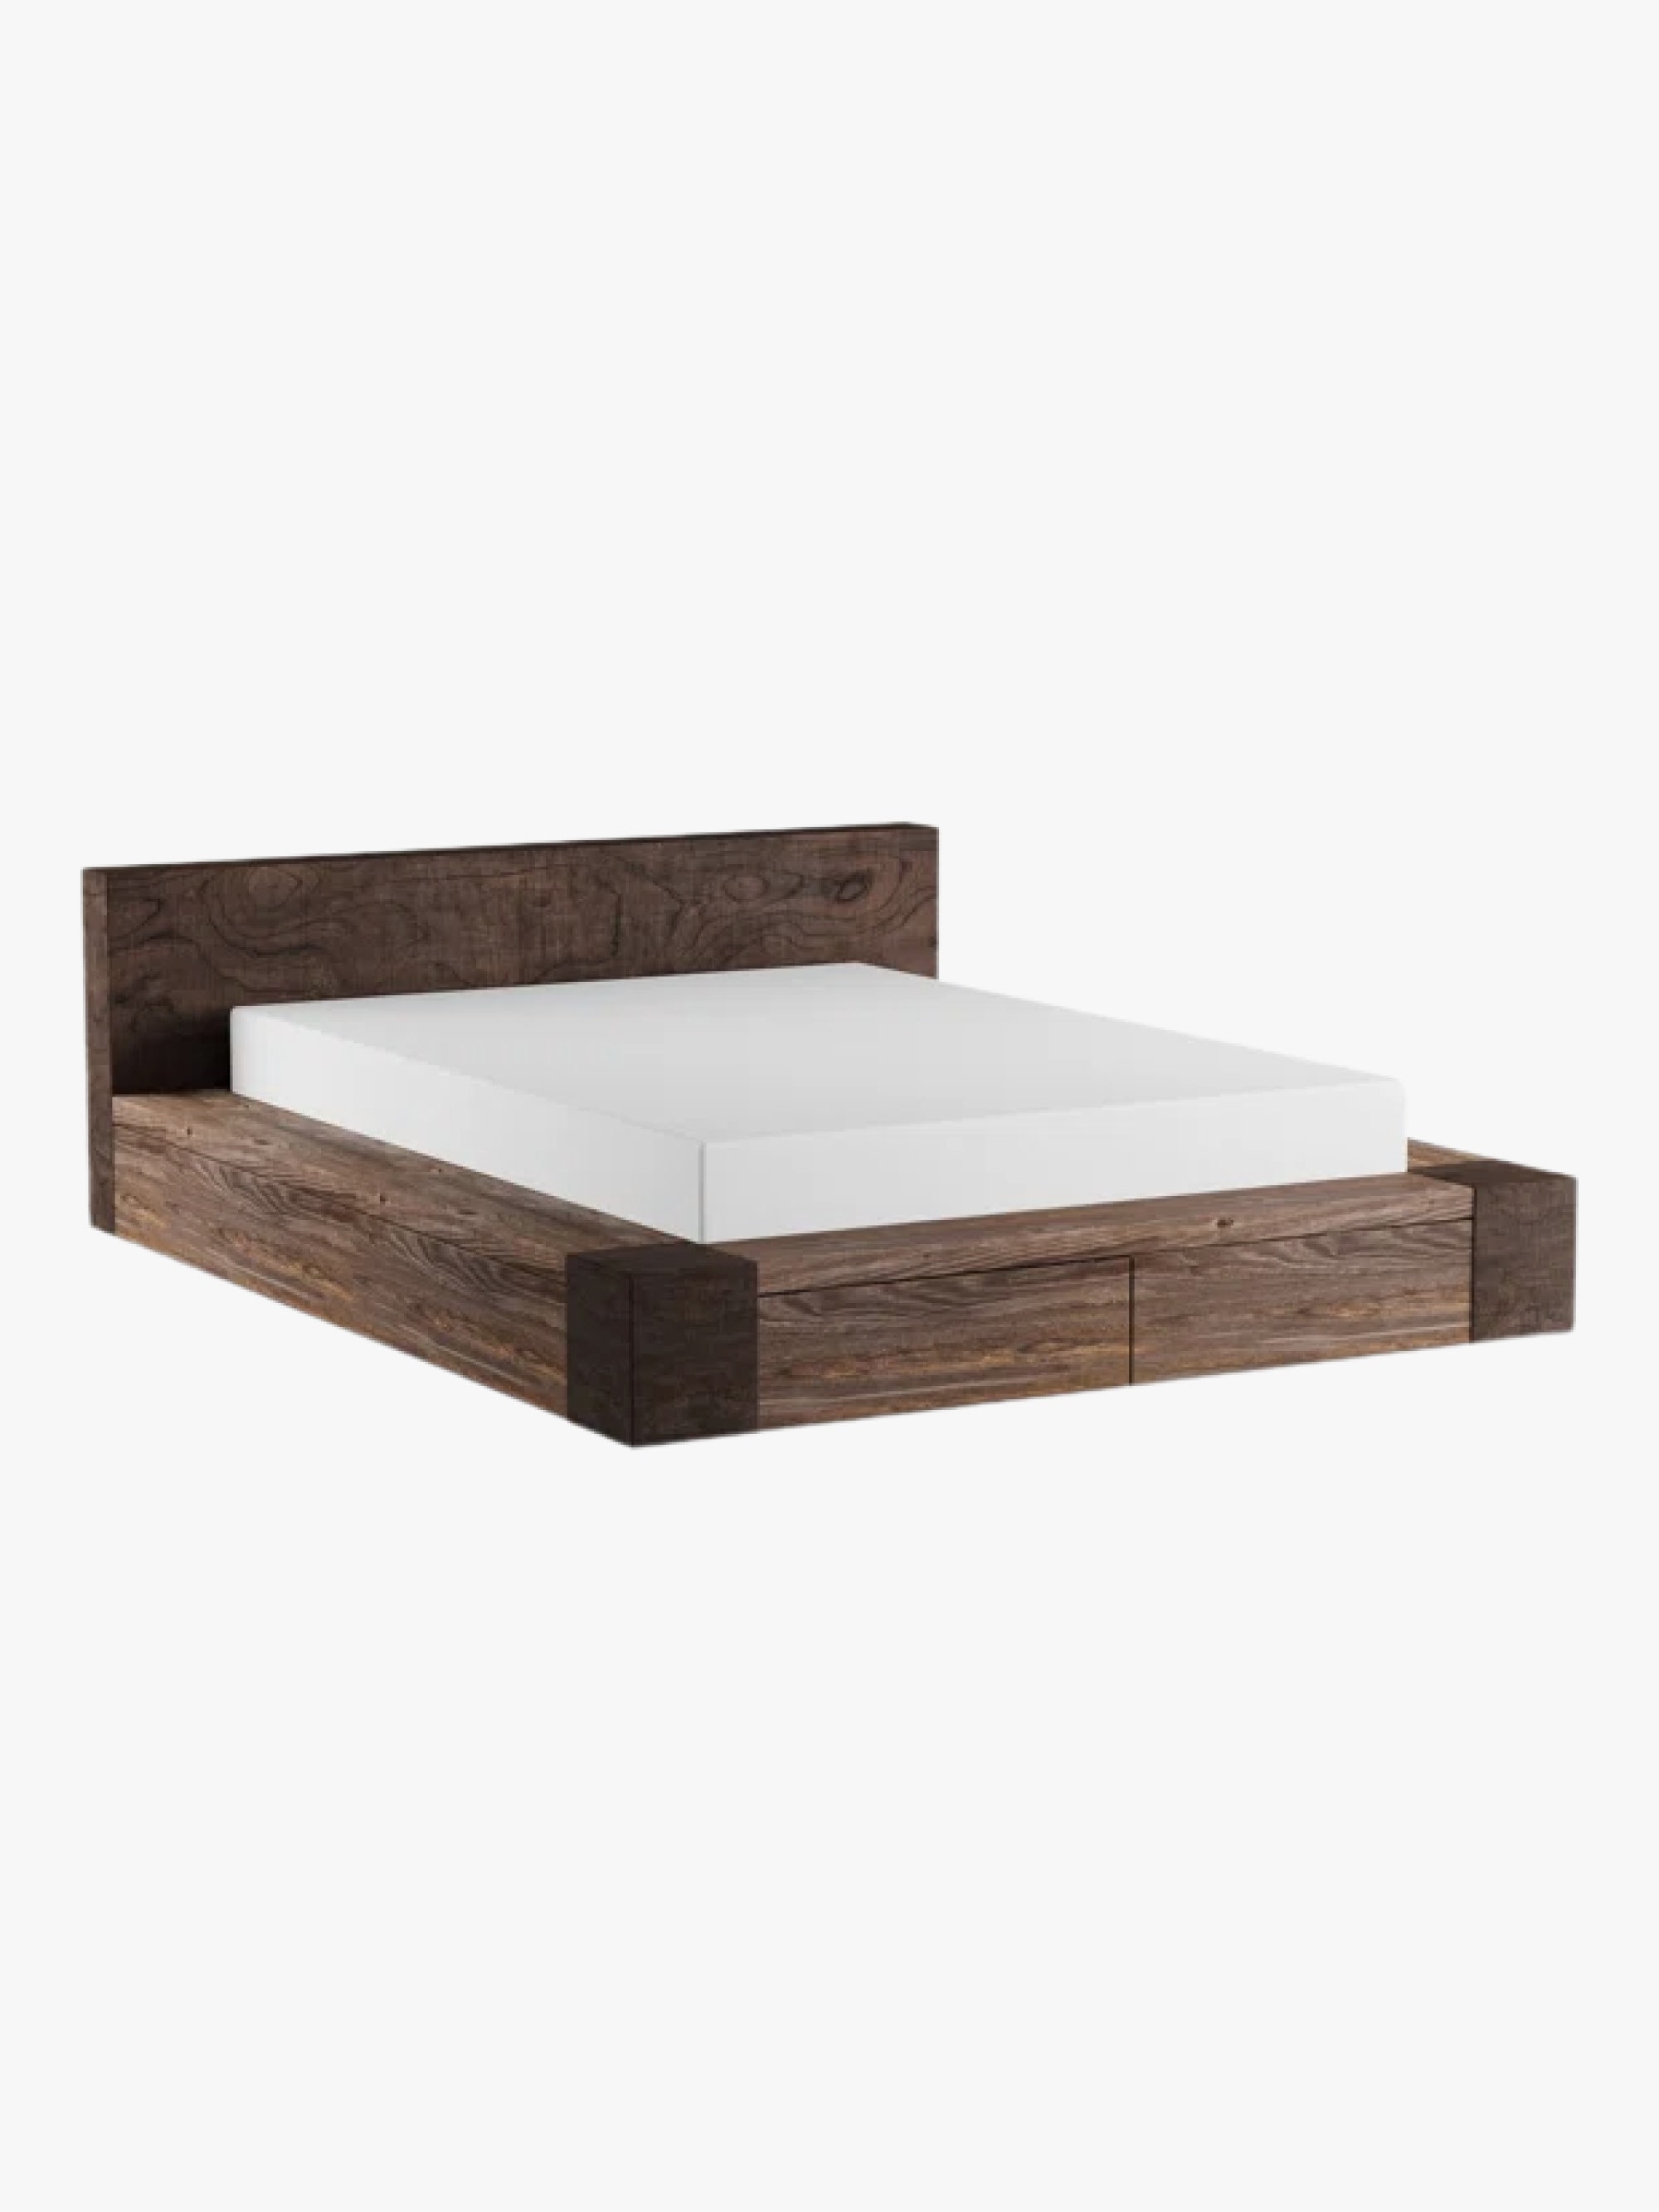 <p>There’s something about the grain on this solid-wood storage bed that transports us to a luxe, boutique-level hotel bedroom. The two drawers located in the footboard of the platform frame are effortless and blend right into the design—perfect if you’ve got a bunch of stuff to store but you don’t want it to look like you do.</p> <ul> <li><strong>Sizes available:</strong> Queen, king, and California king</li> <li><strong>Colors available:</strong> Natural wood</li> <li><strong>Storage type:</strong> Two underbed storage drawers</li> <li><strong>Materials:</strong> MDF, solid wood</li> <li><strong>Weight capacity:</strong> 500 pounds</li> </ul> $1400, Wayfair. <a href="https://www.wayfair.com/furniture/pdp/foundstone-alea-storage-platform-bed-trnt2387.html?">Get it now!</a><p>Sign up for our newsletter to get the latest in design, decorating, celebrity style, shopping, and more.</p><a href="https://www.architecturaldigest.com/newsletter/subscribe?sourceCode=msnsend">Sign Up Now</a>